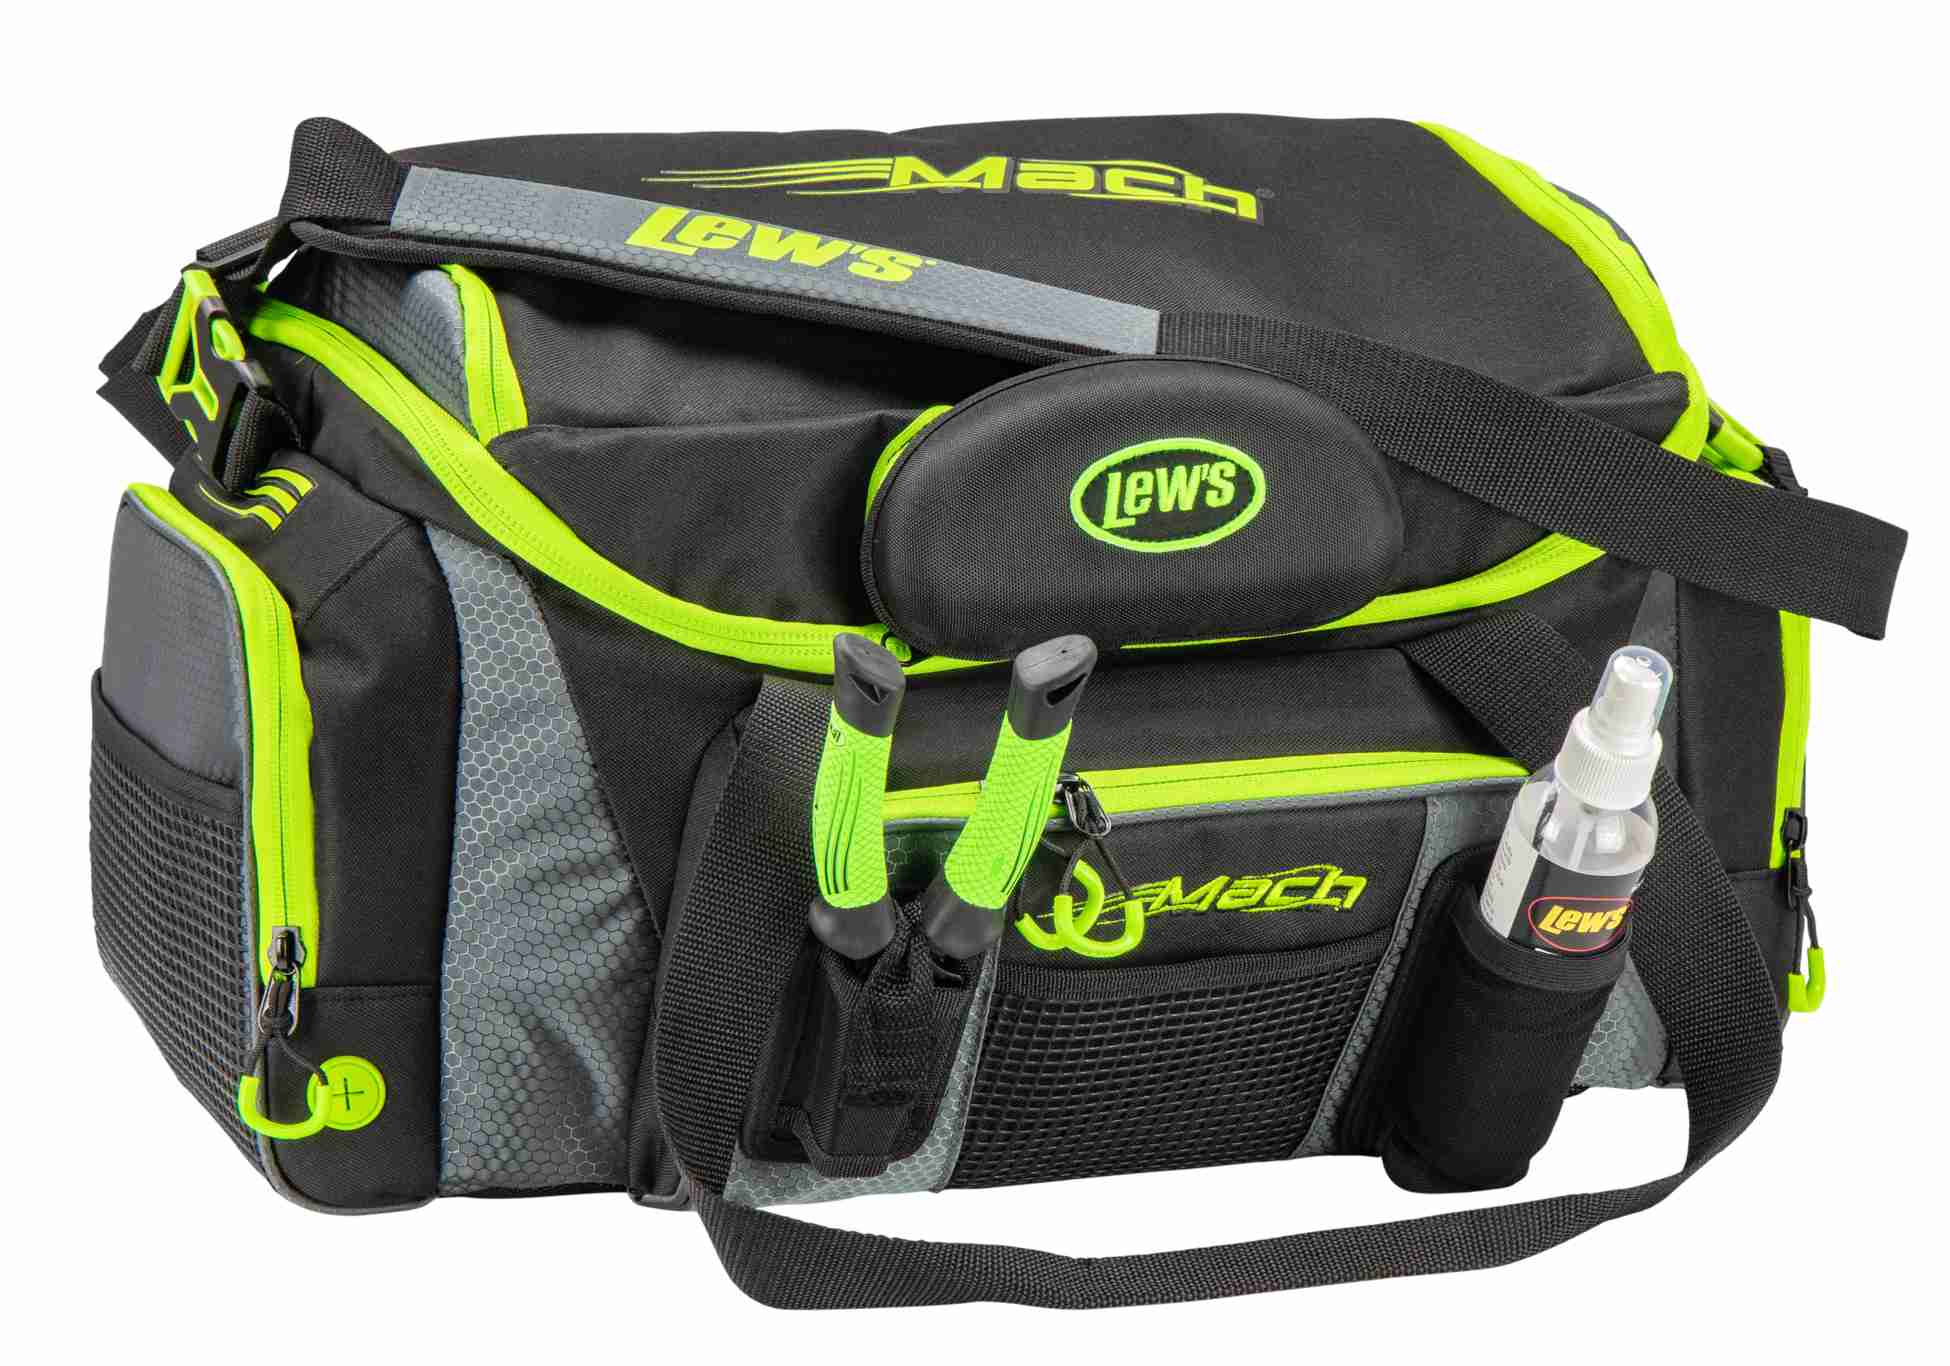 Close-up of Lew's Mach fishing tackle bag in green and black